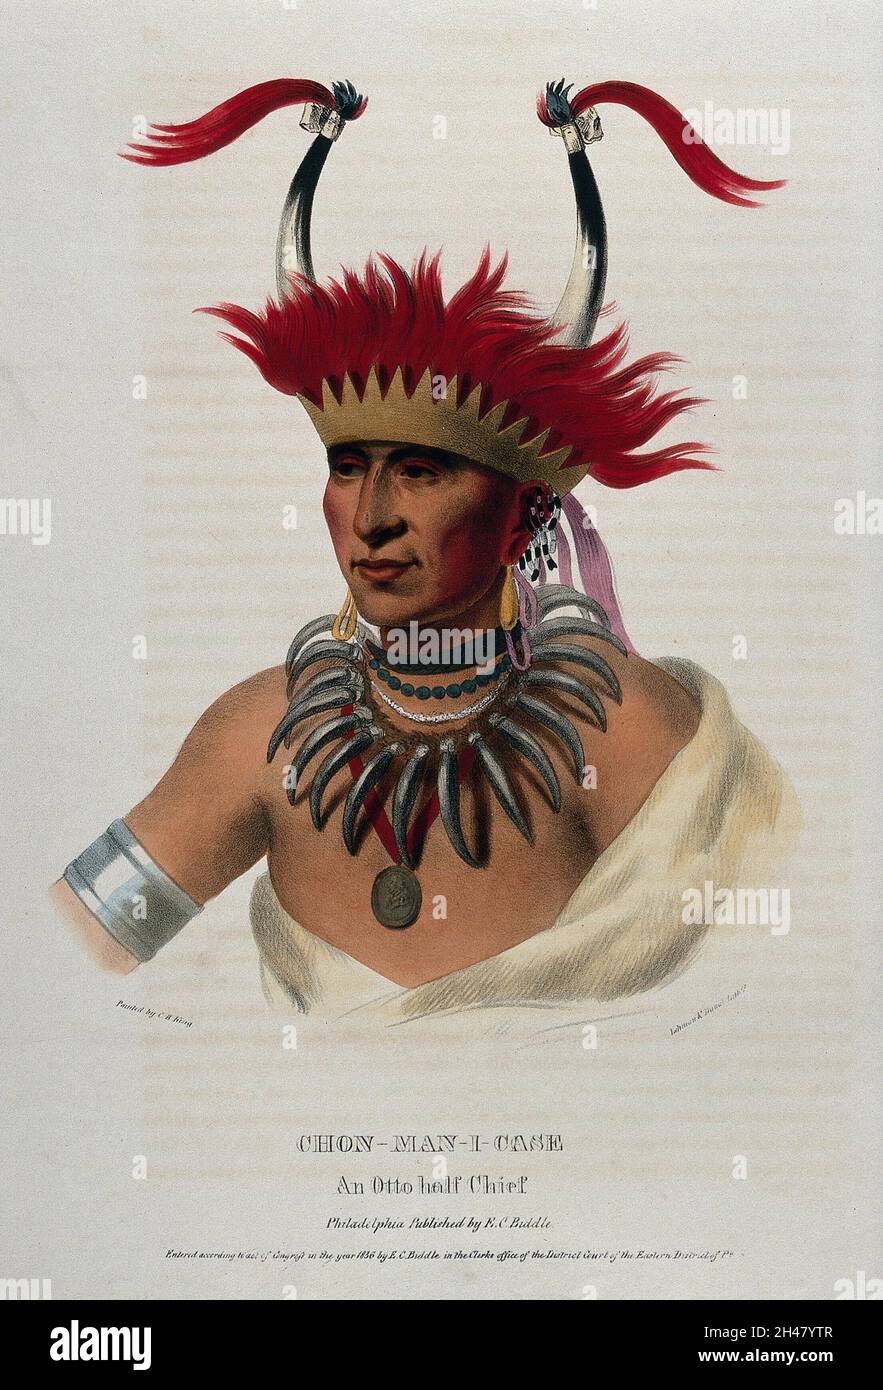 Shaumonekusse, a chief of the Oto (Otoe) tribe, wearing a crown hair piece with horns, a bear-claw necklace and a medallion. Coloured lithograph by Lehman & Duval after C. B. King, 1833. Stock Photo